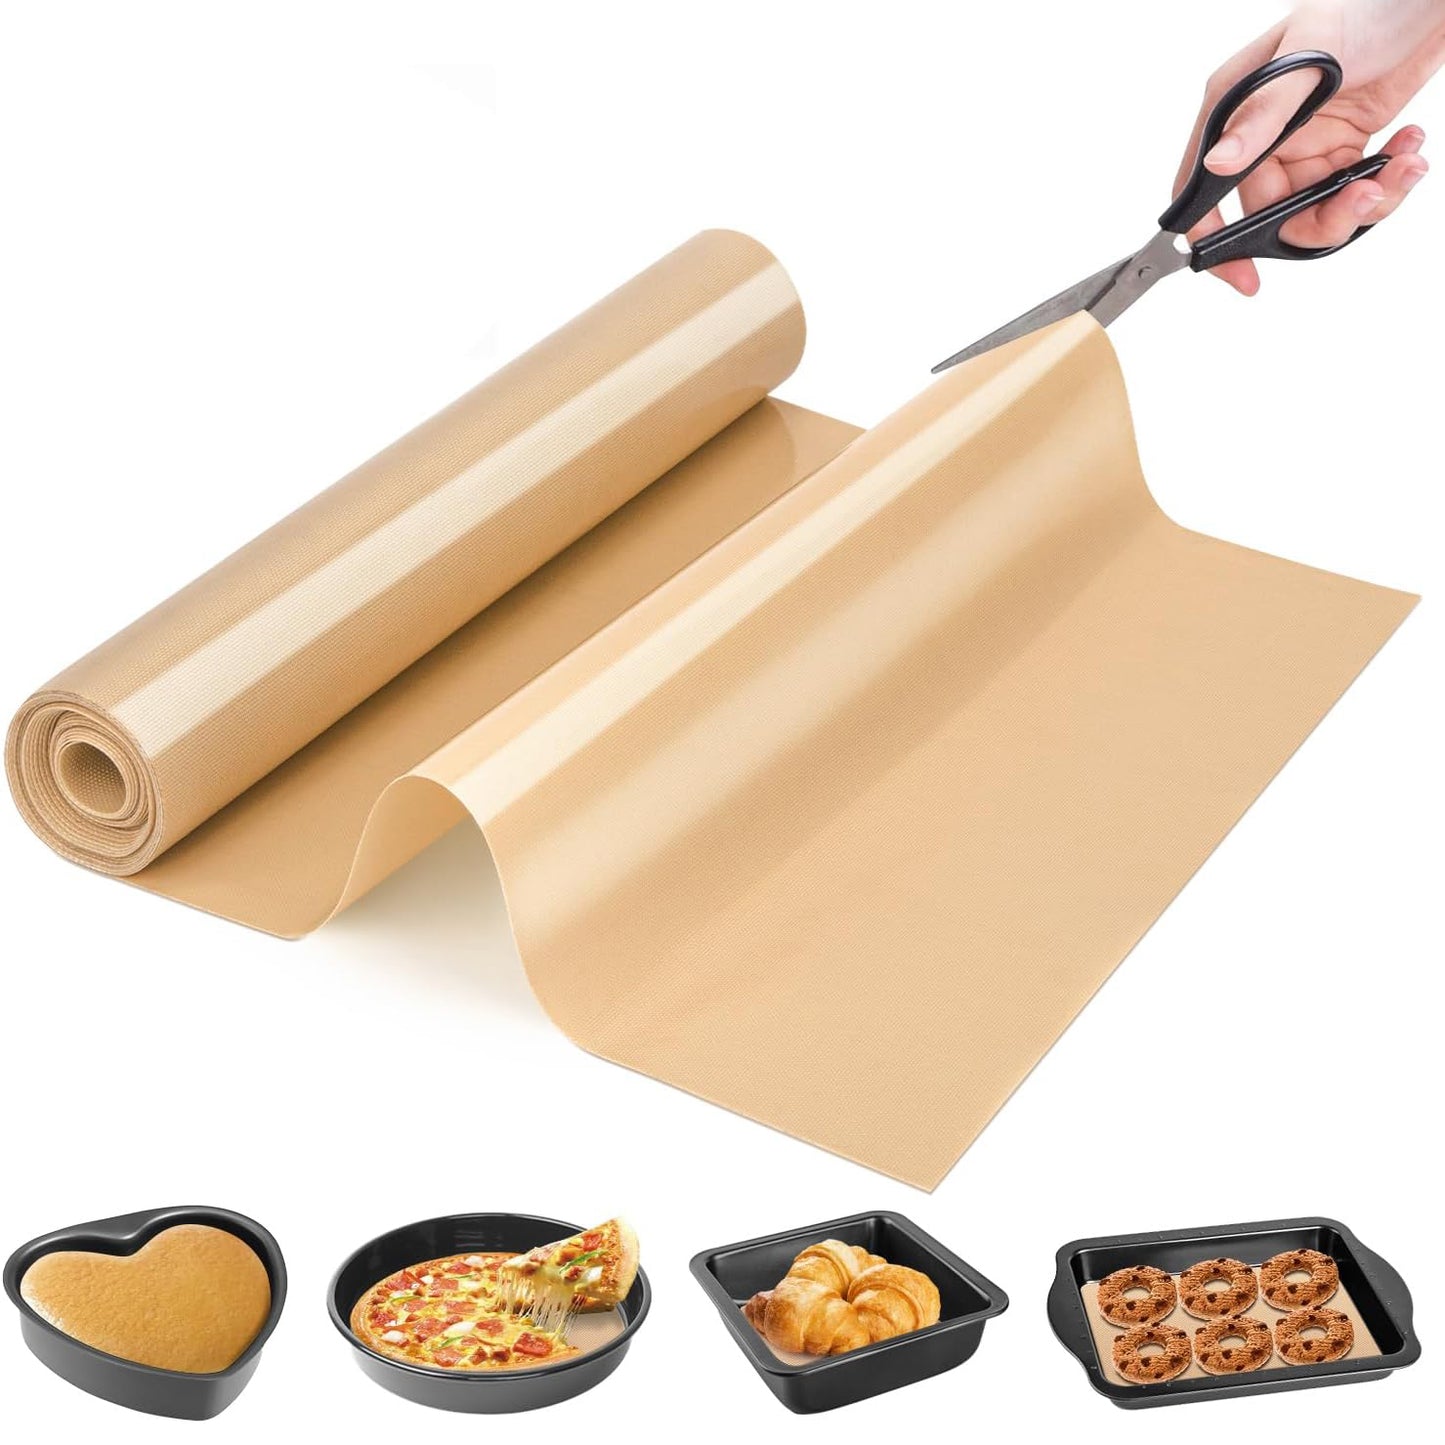 Silicone Baking Mat Roll